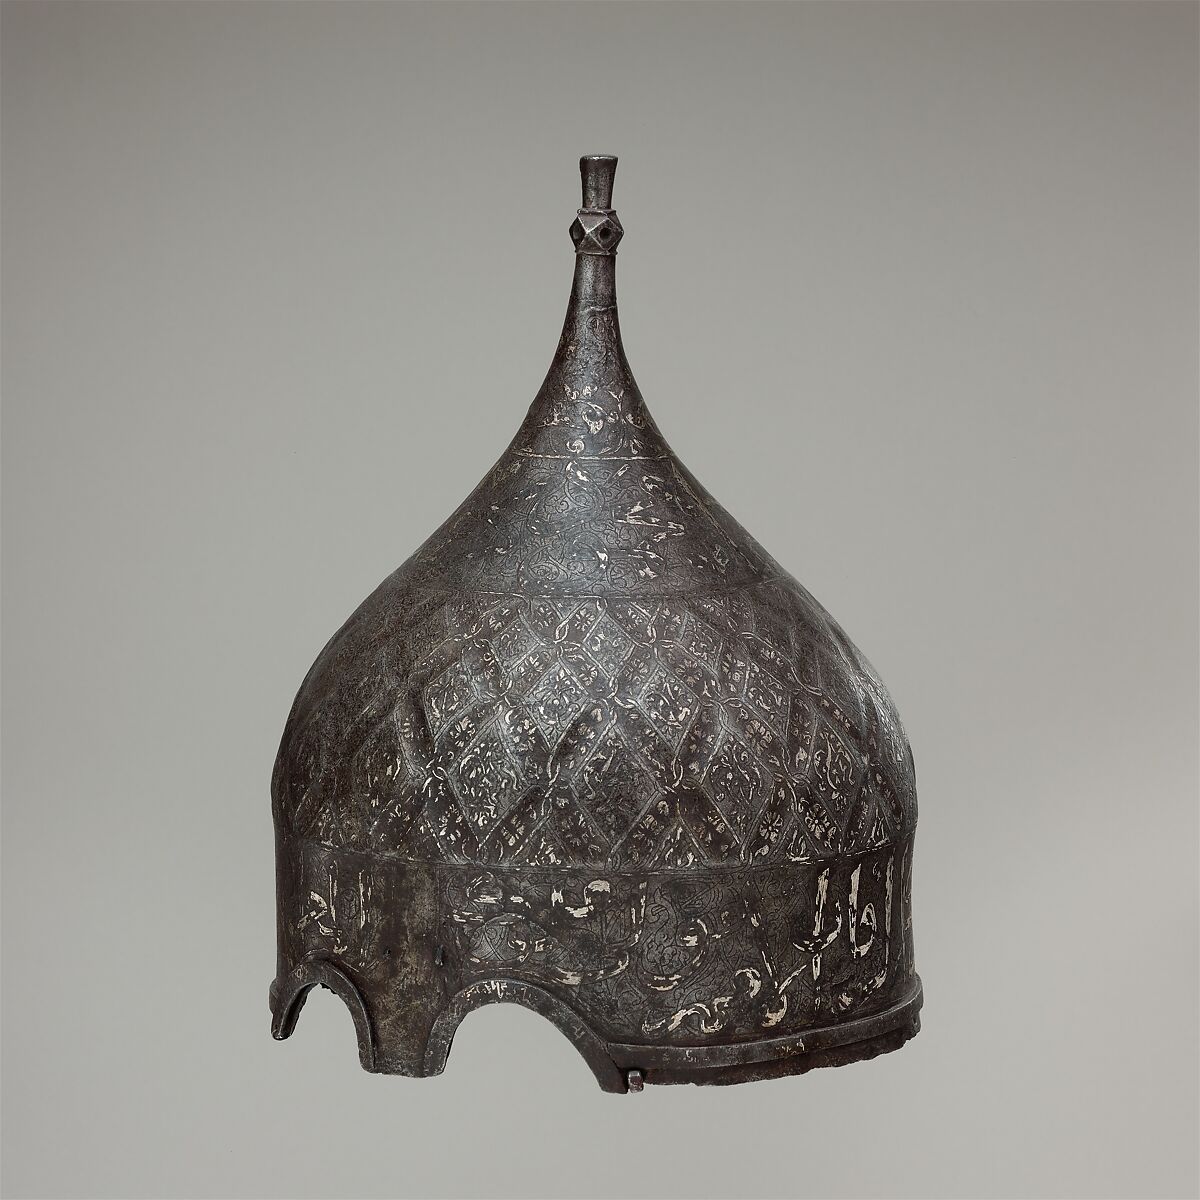 Turban Helmet, Steel, iron, silver, Turkish, possibly Istanbul, in the style of Turkman armor 